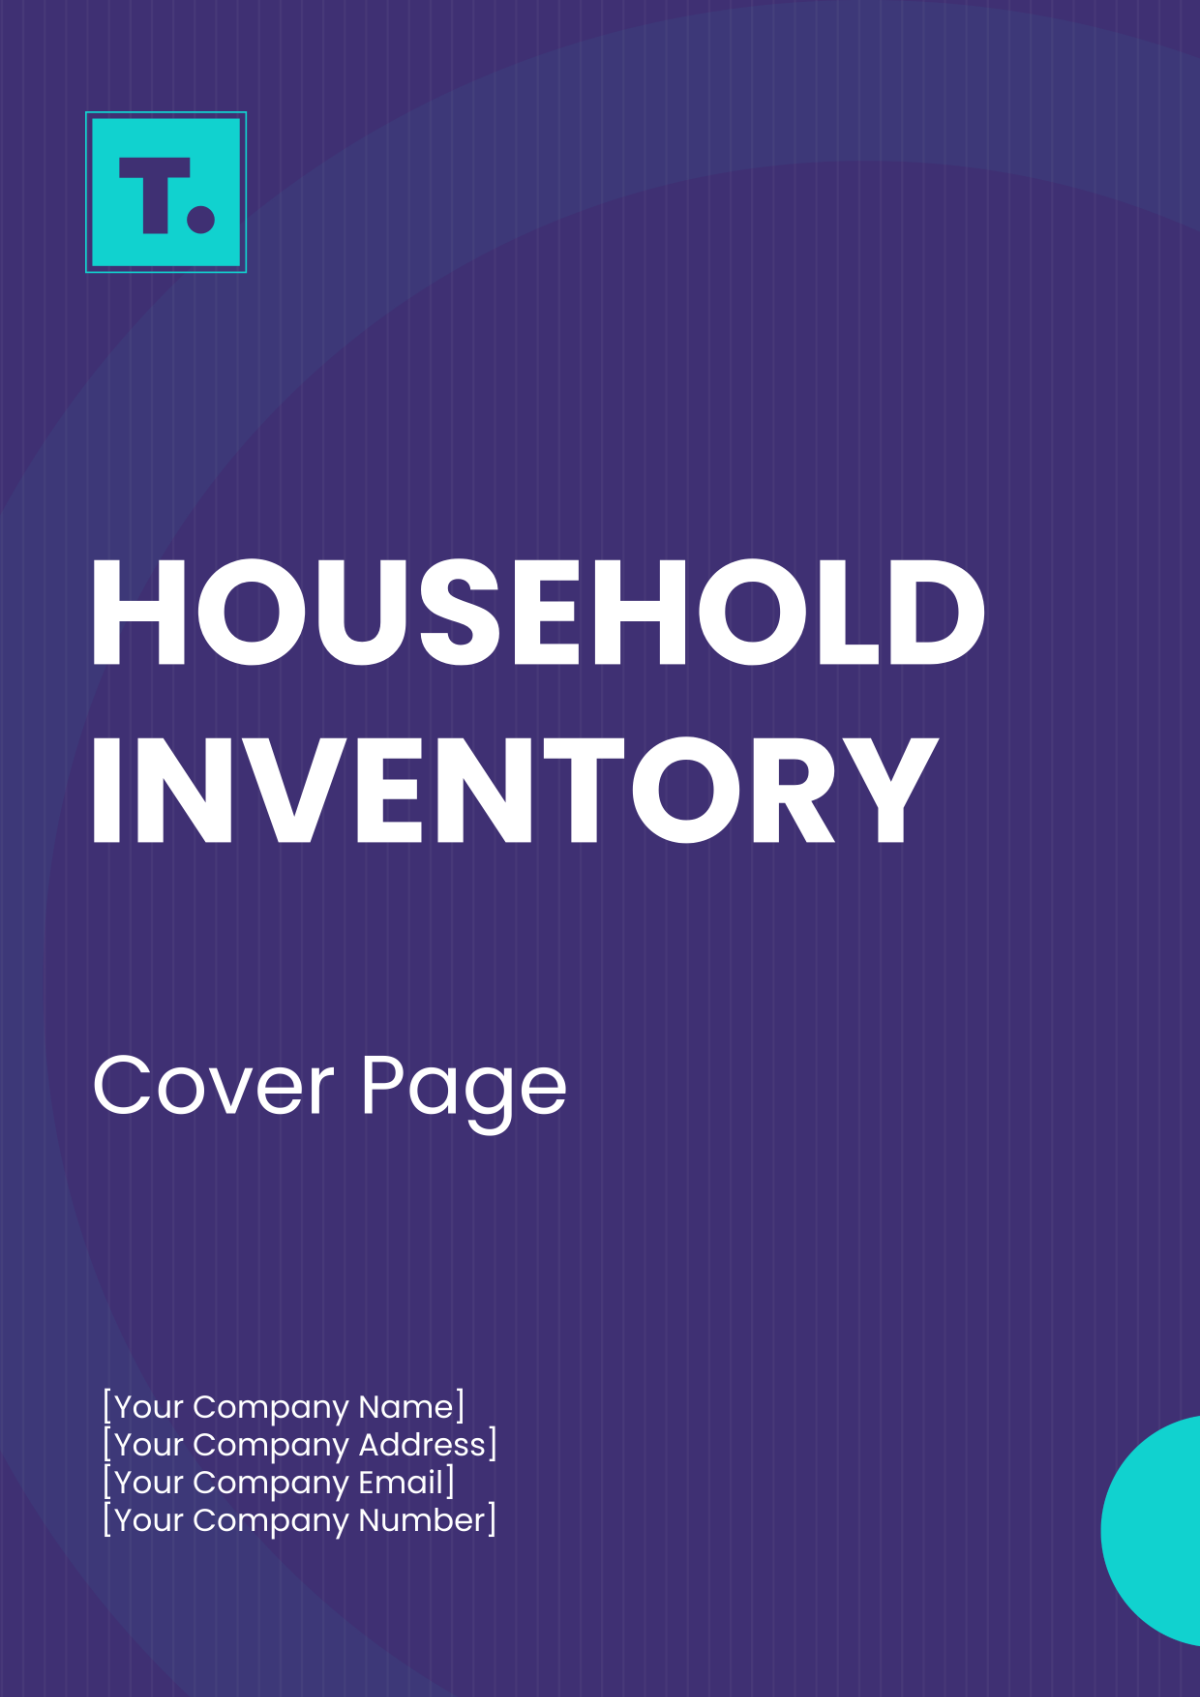 Household Inventory Cover Page